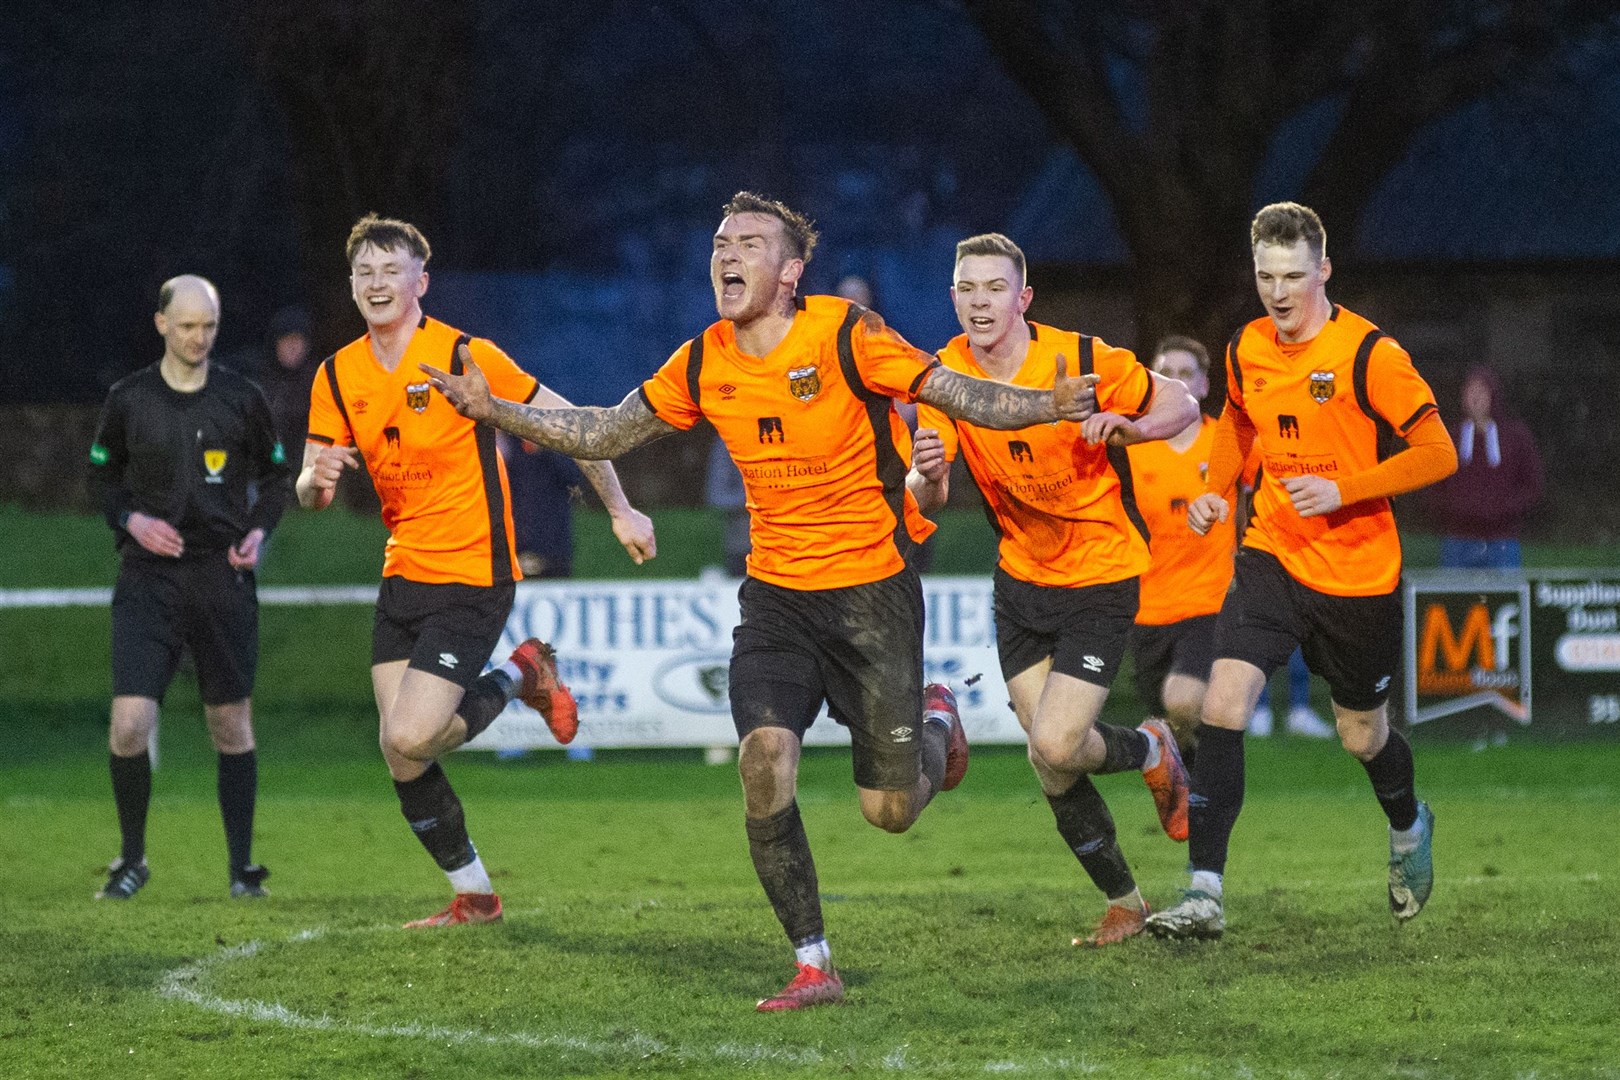 Elgin City loan player Darryl McHardy leads a Rothes celebration after scoring the winner against Strathspey Thistle. Picture: Daniel Forsyth..